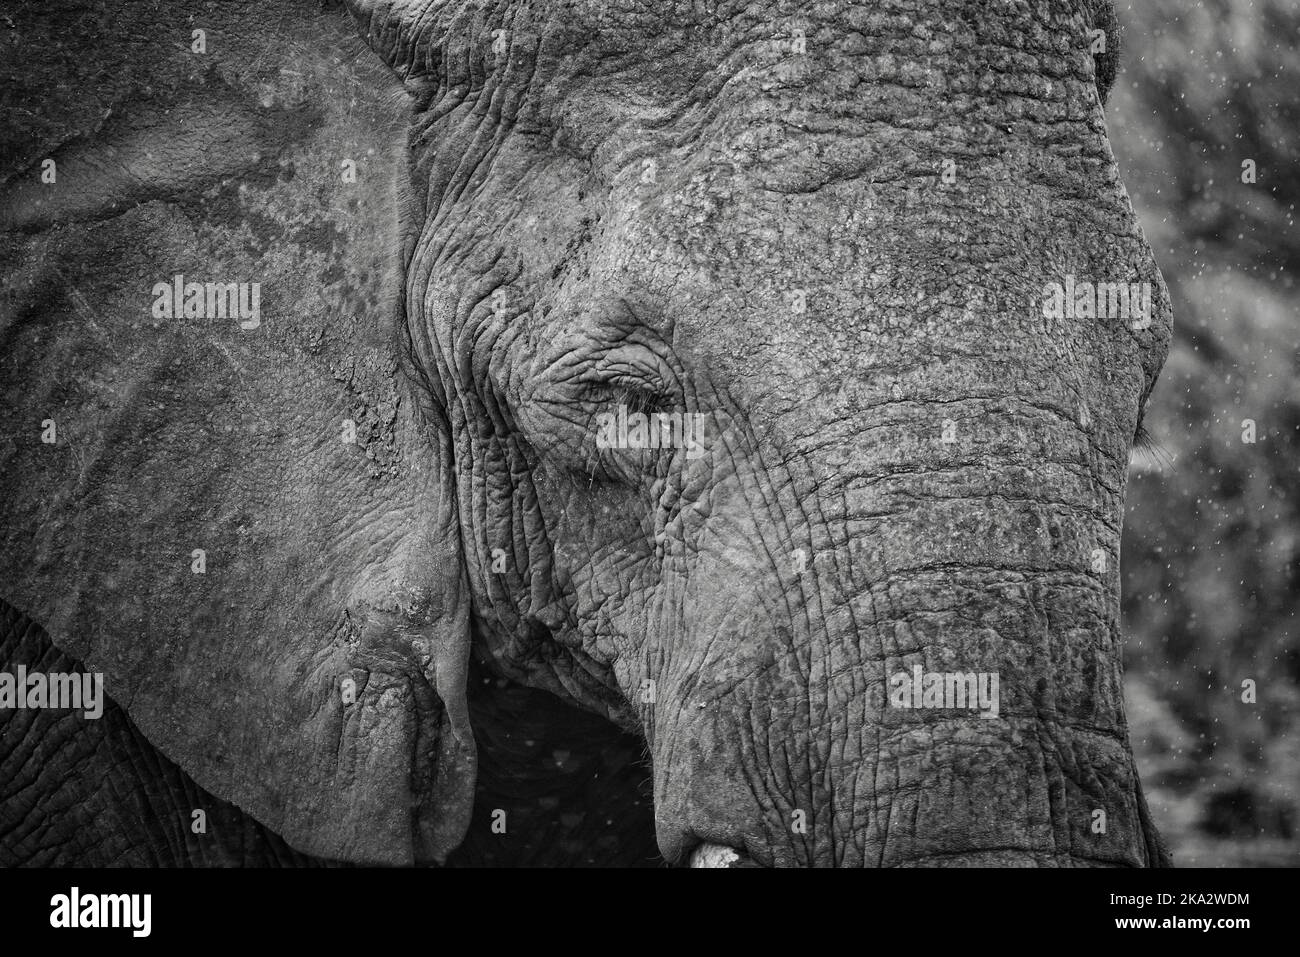 A sad eyed elephant seen in close up, in rain, in South Africa. Shot in Black and White. Stock Photo